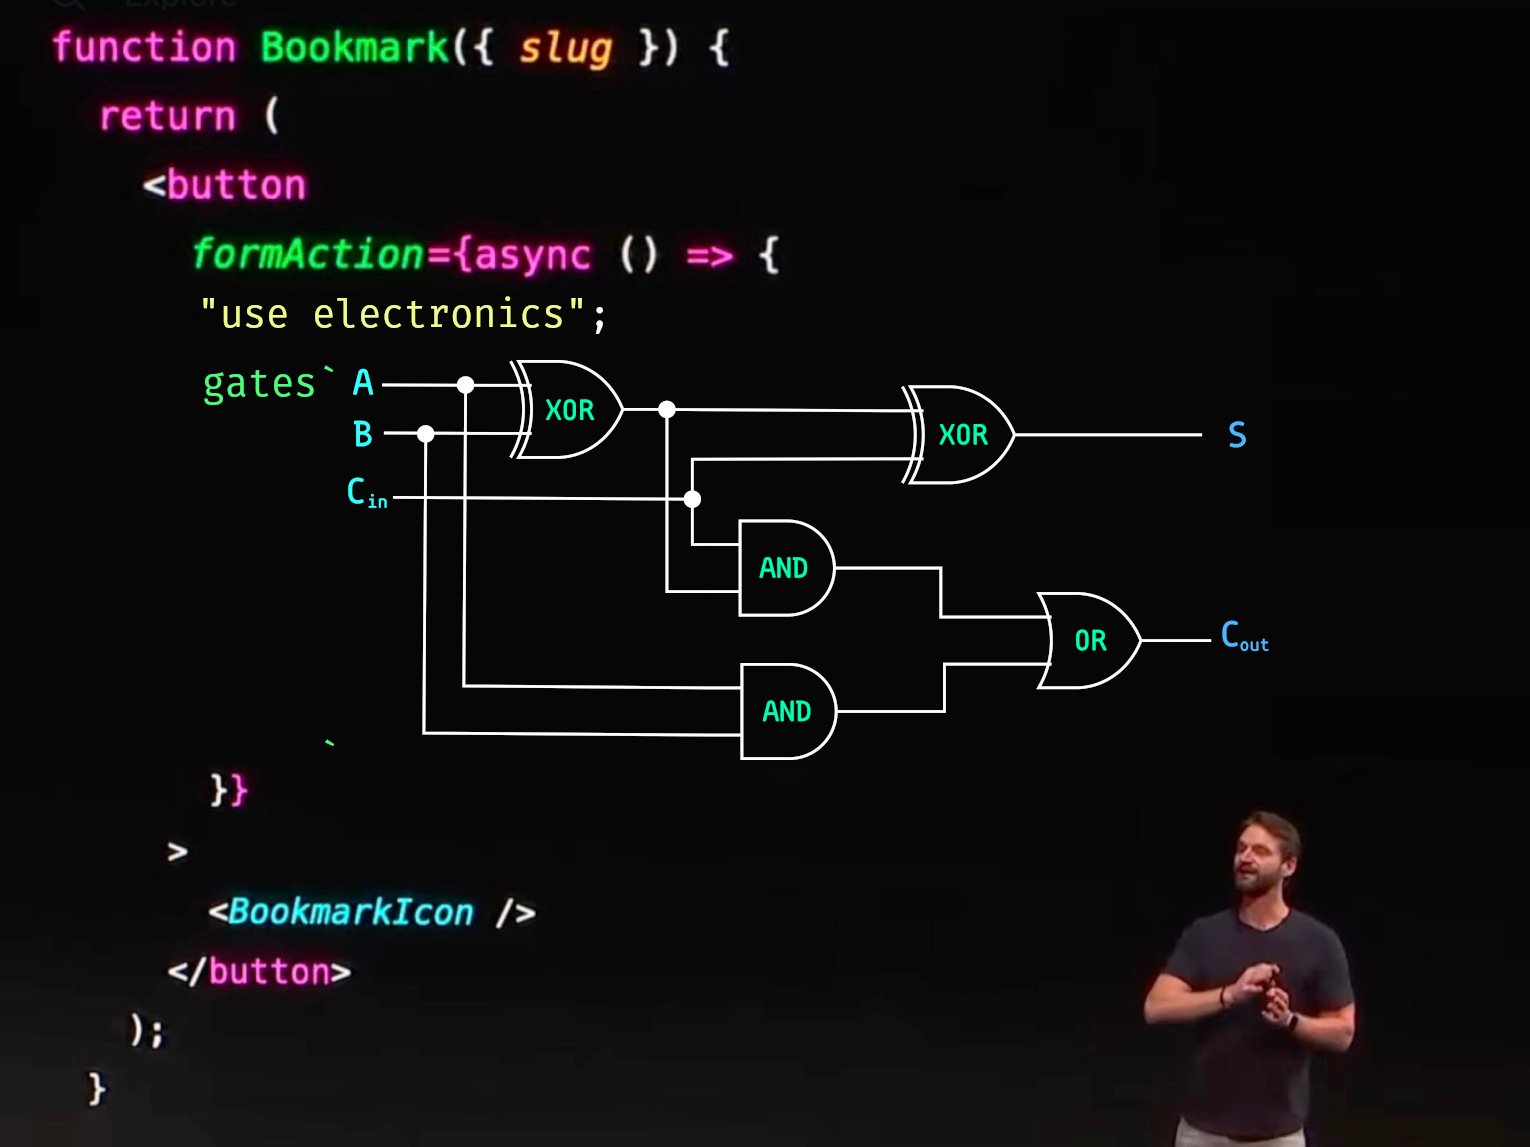 Sam Selikoff shows how to control electronics in a Next.js server action.